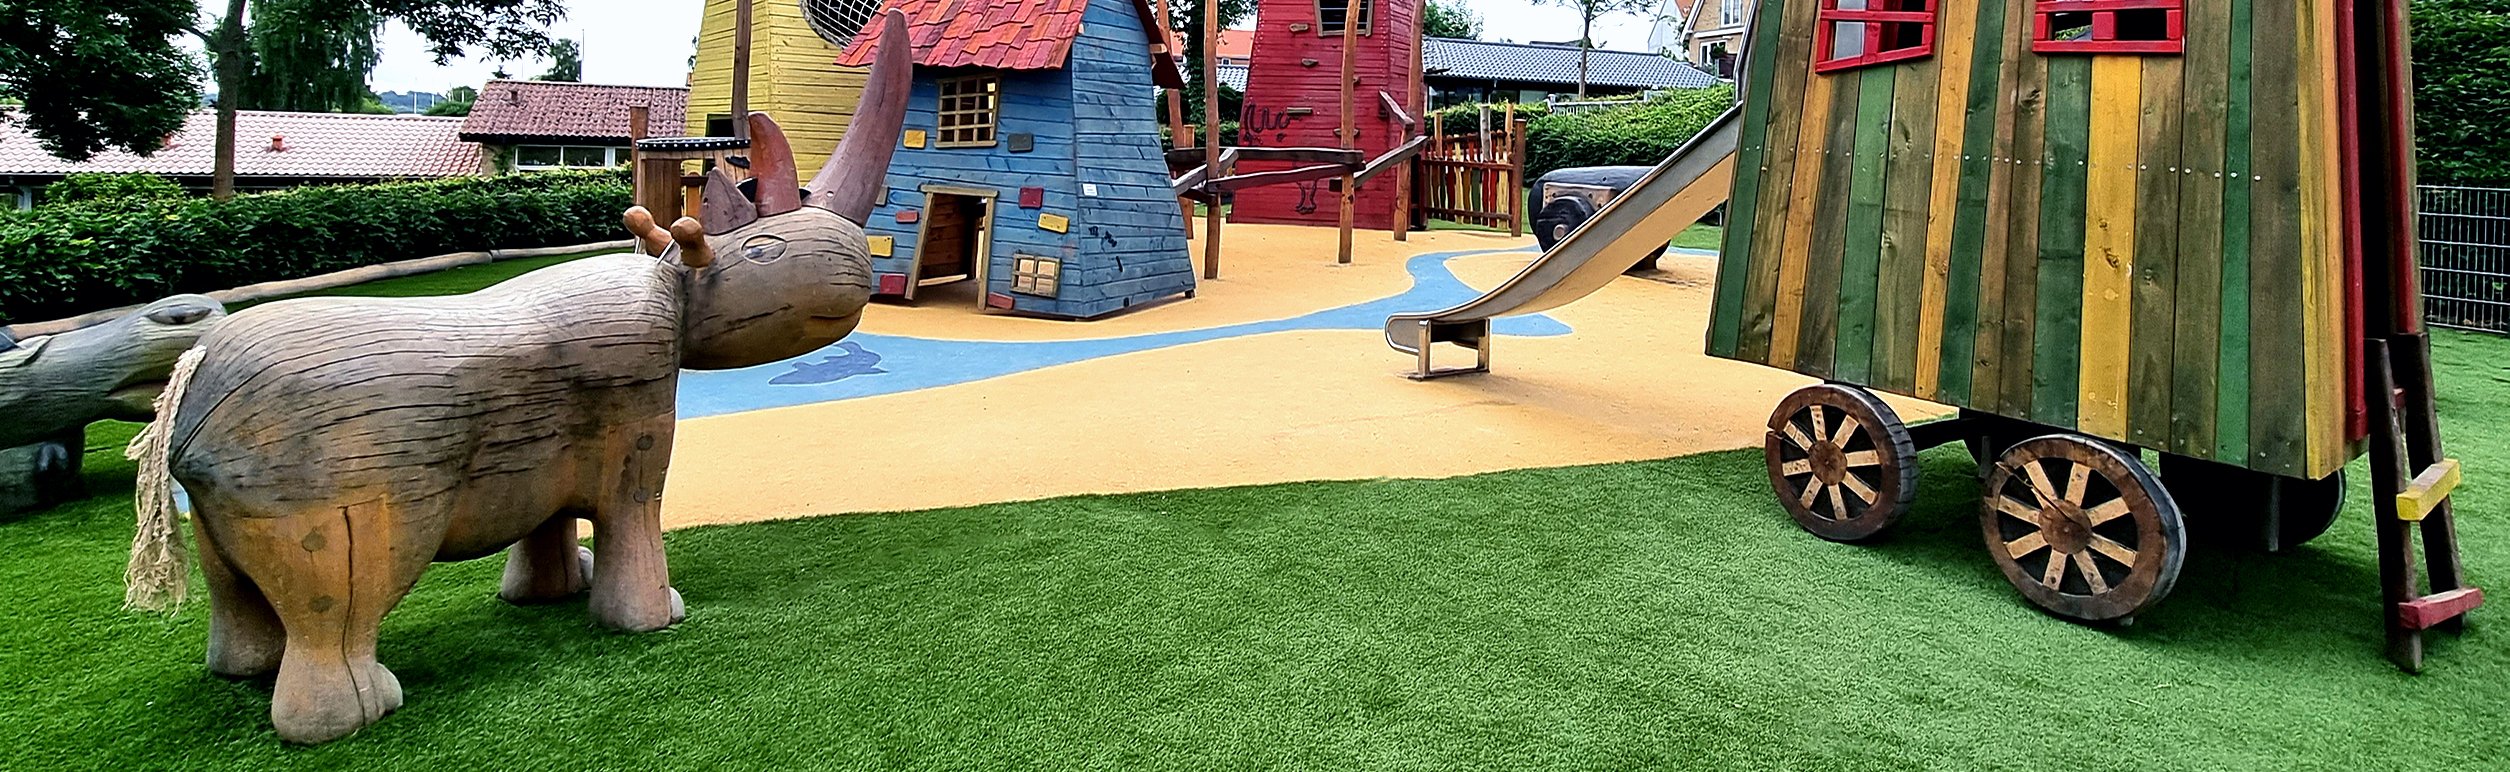 Many possibilities with artificial grass